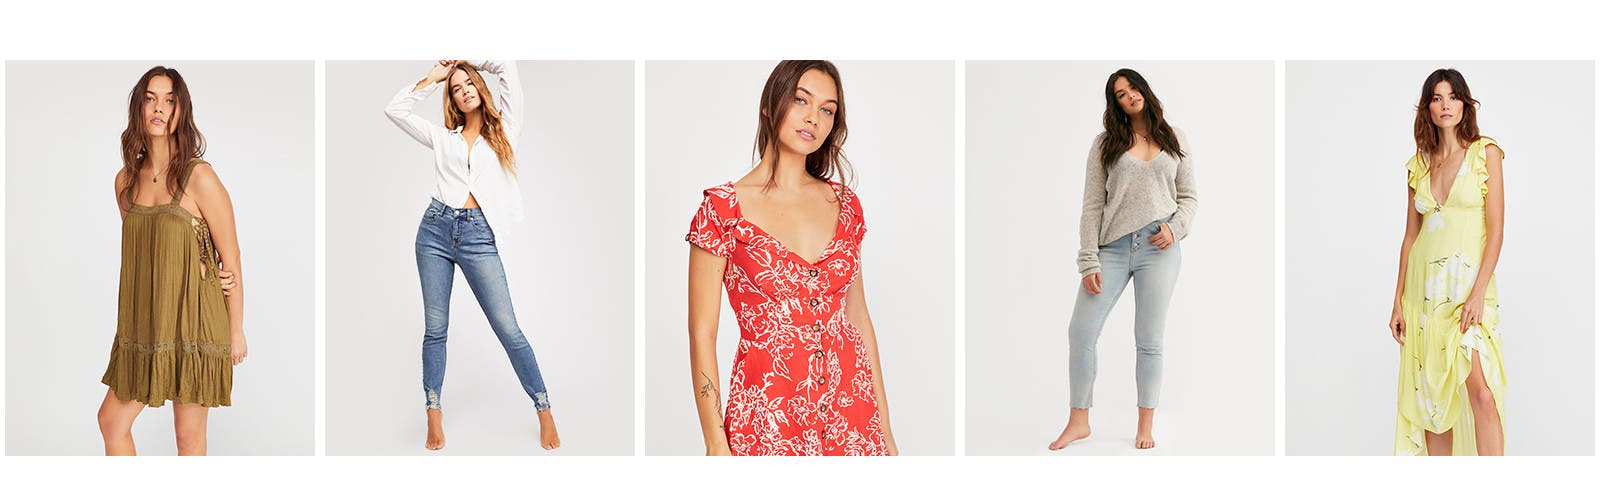 Free People Women's Clothing | Nordstrom